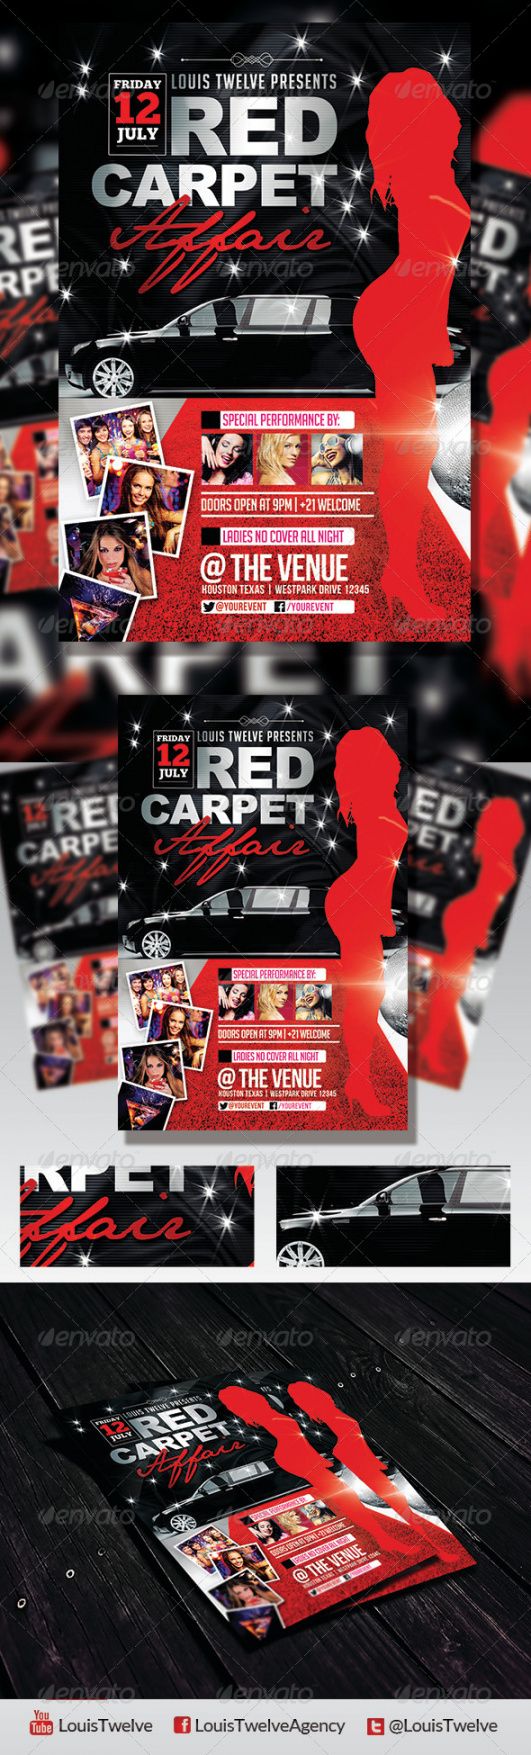 free red carpet flyer graphics designs &amp;amp; templates from graphicriver red carpet event flyer template pdf